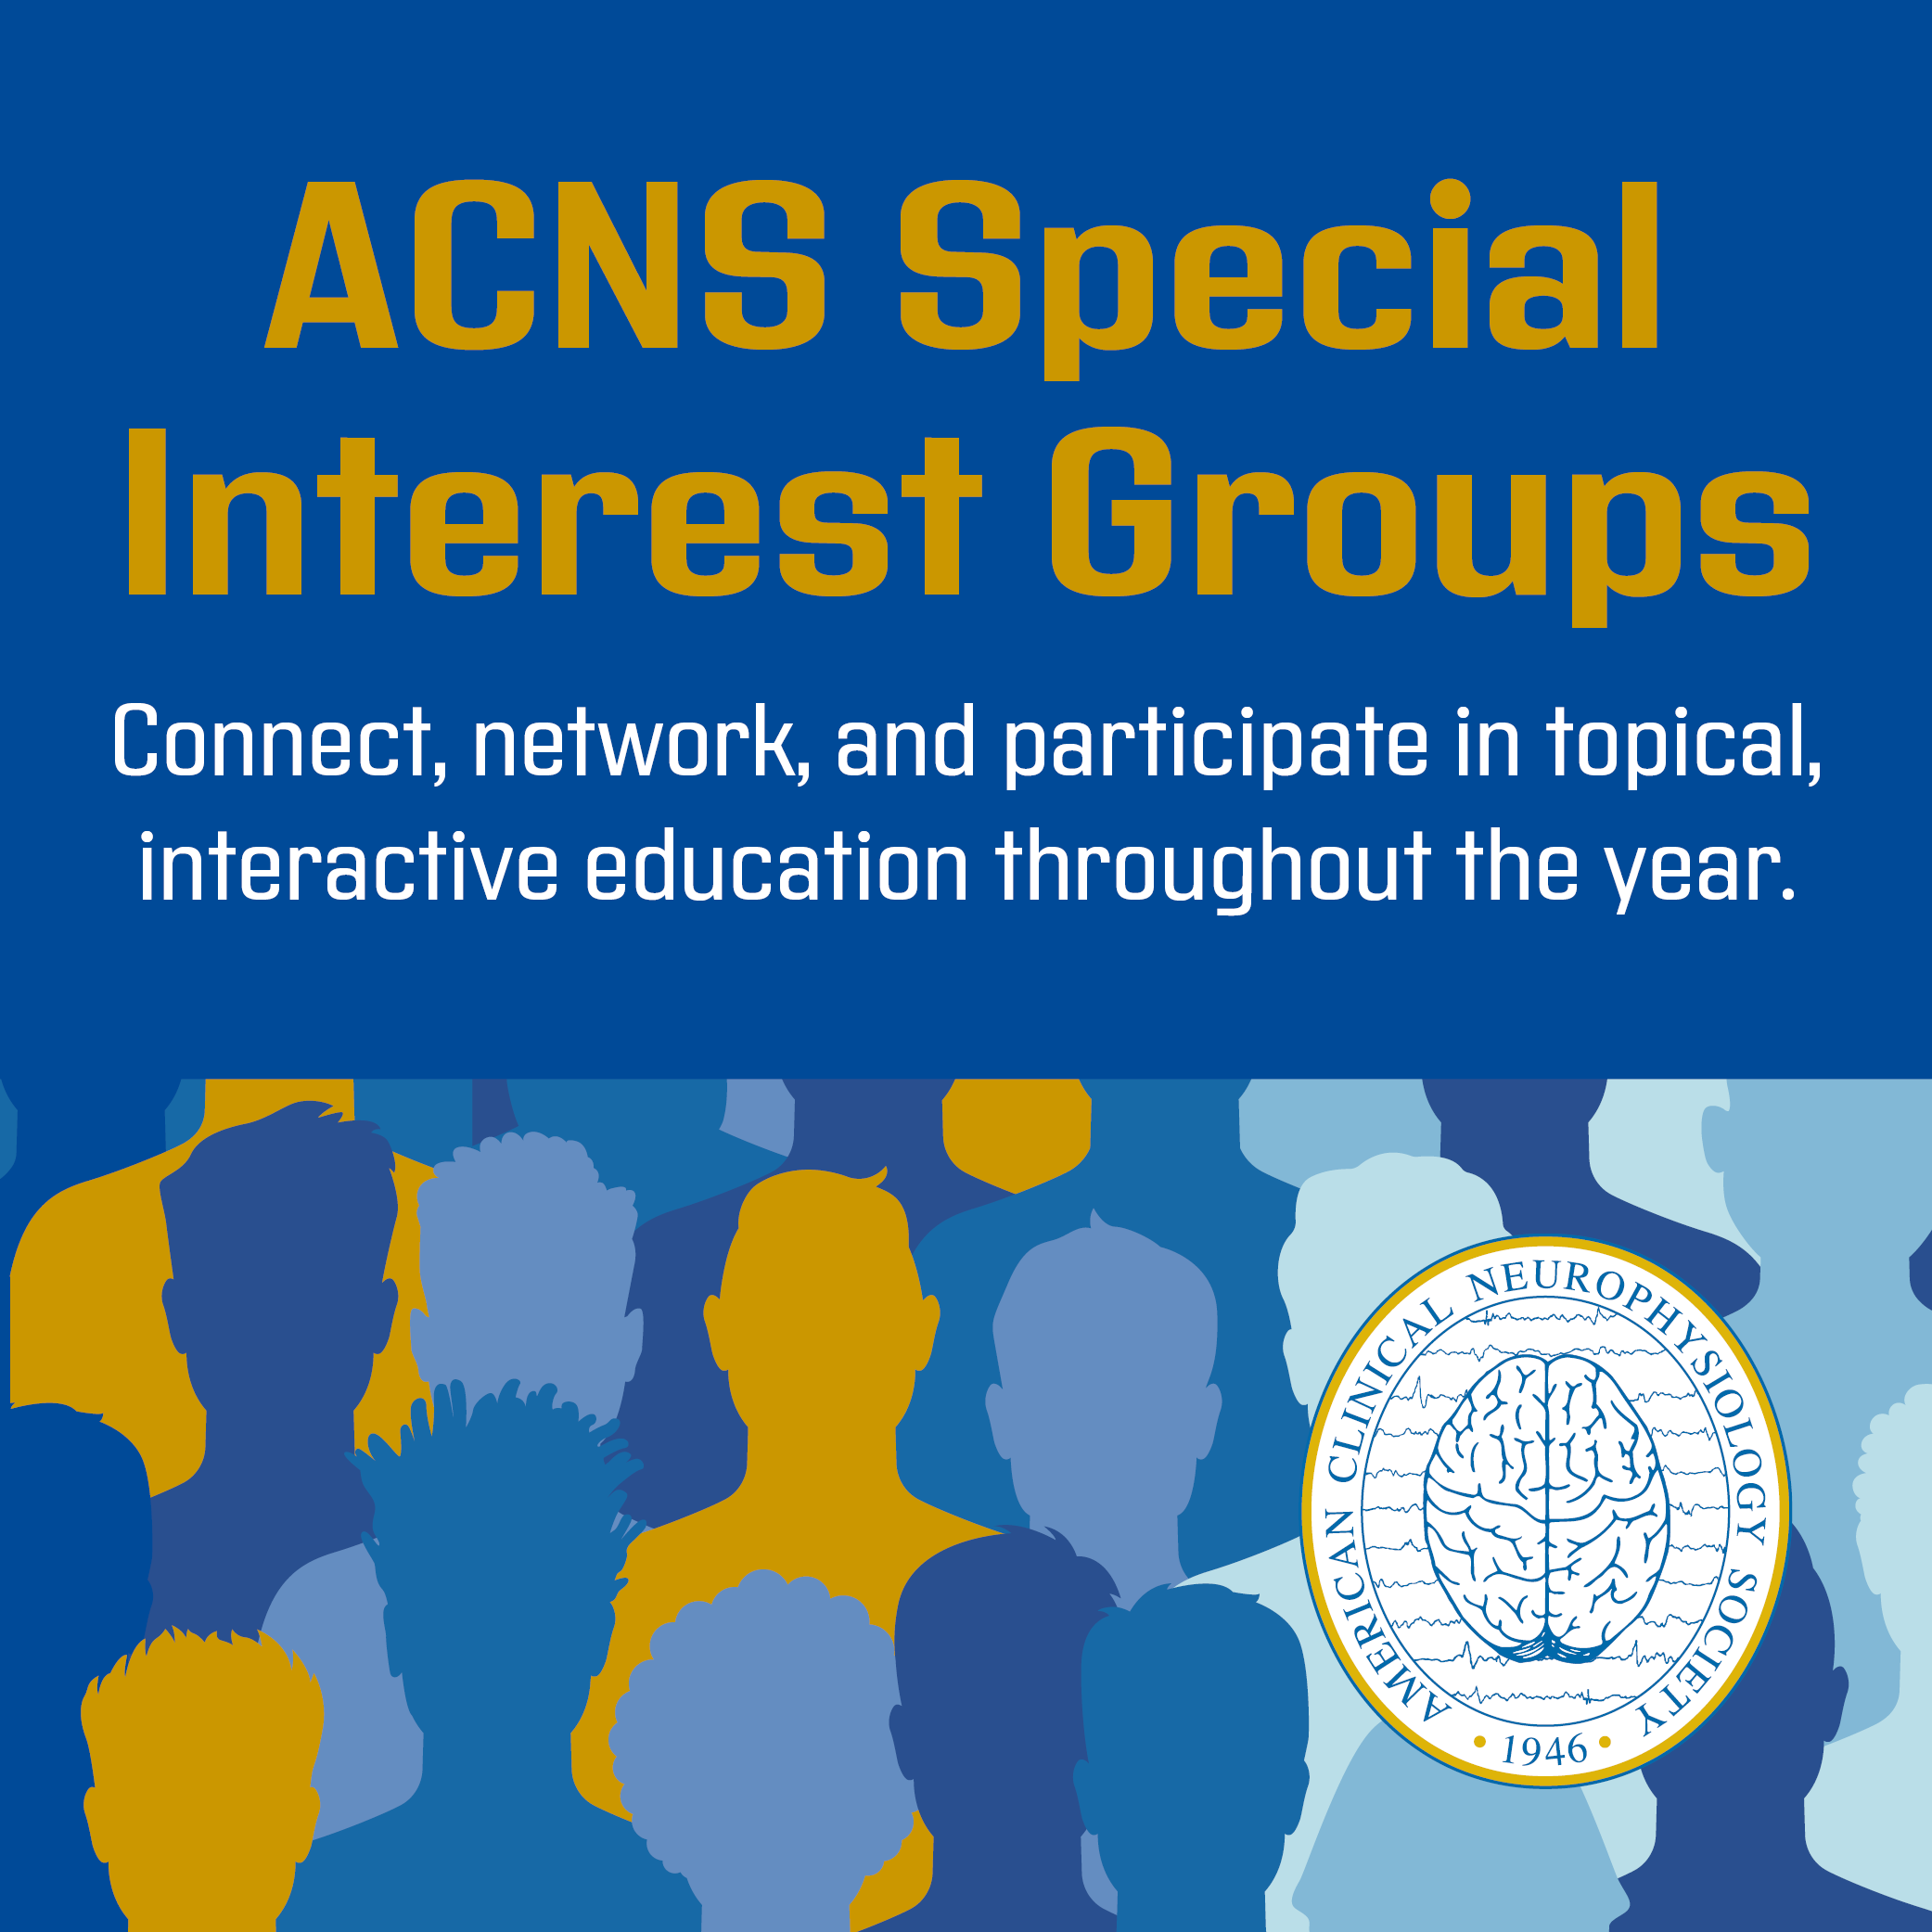 ACNS Special Interest Groups (SIGs)